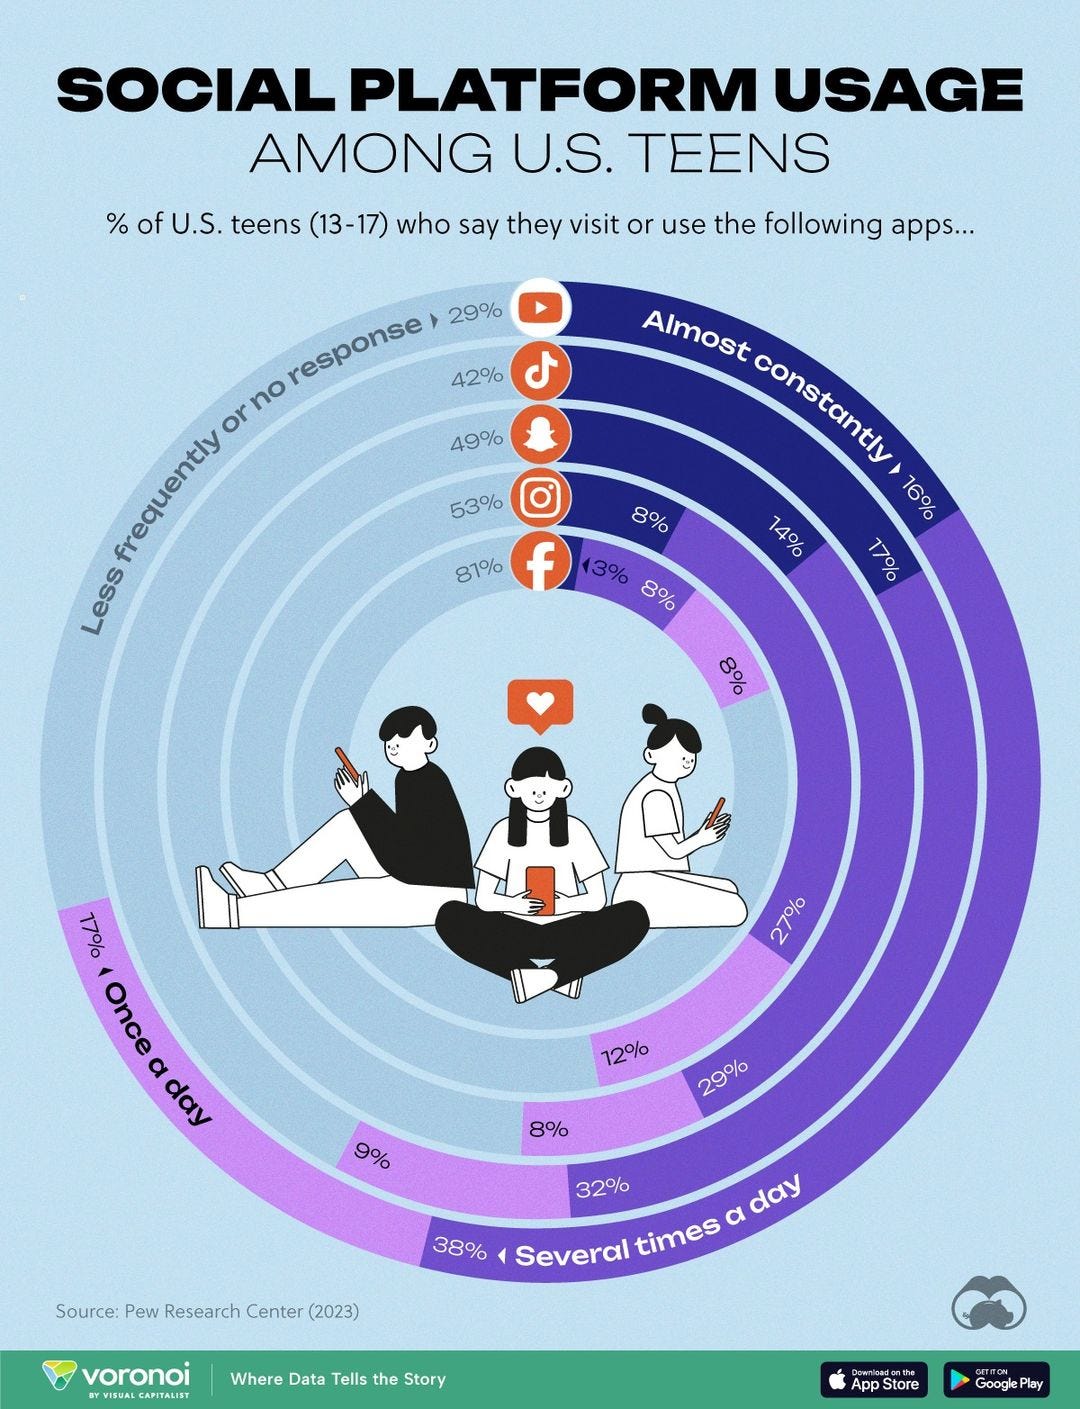 May be a graphic of text that says 'SOCIAL PLATFORM USAGE AMONG U.S. TEENS teens (13-17) who say they visit or use the following apps... epone 29% 42% よ or no frequently Less 49% Almost constantly 16% 17% 53% 8% 81% f 3% 8% 14% 8% 17% Once a day 27% 12% 29% 8% 9% Source: Pew Research Center (2023) 32% day 38% Several times voronoi Where Data Tells the Story App tore GooglePlay'